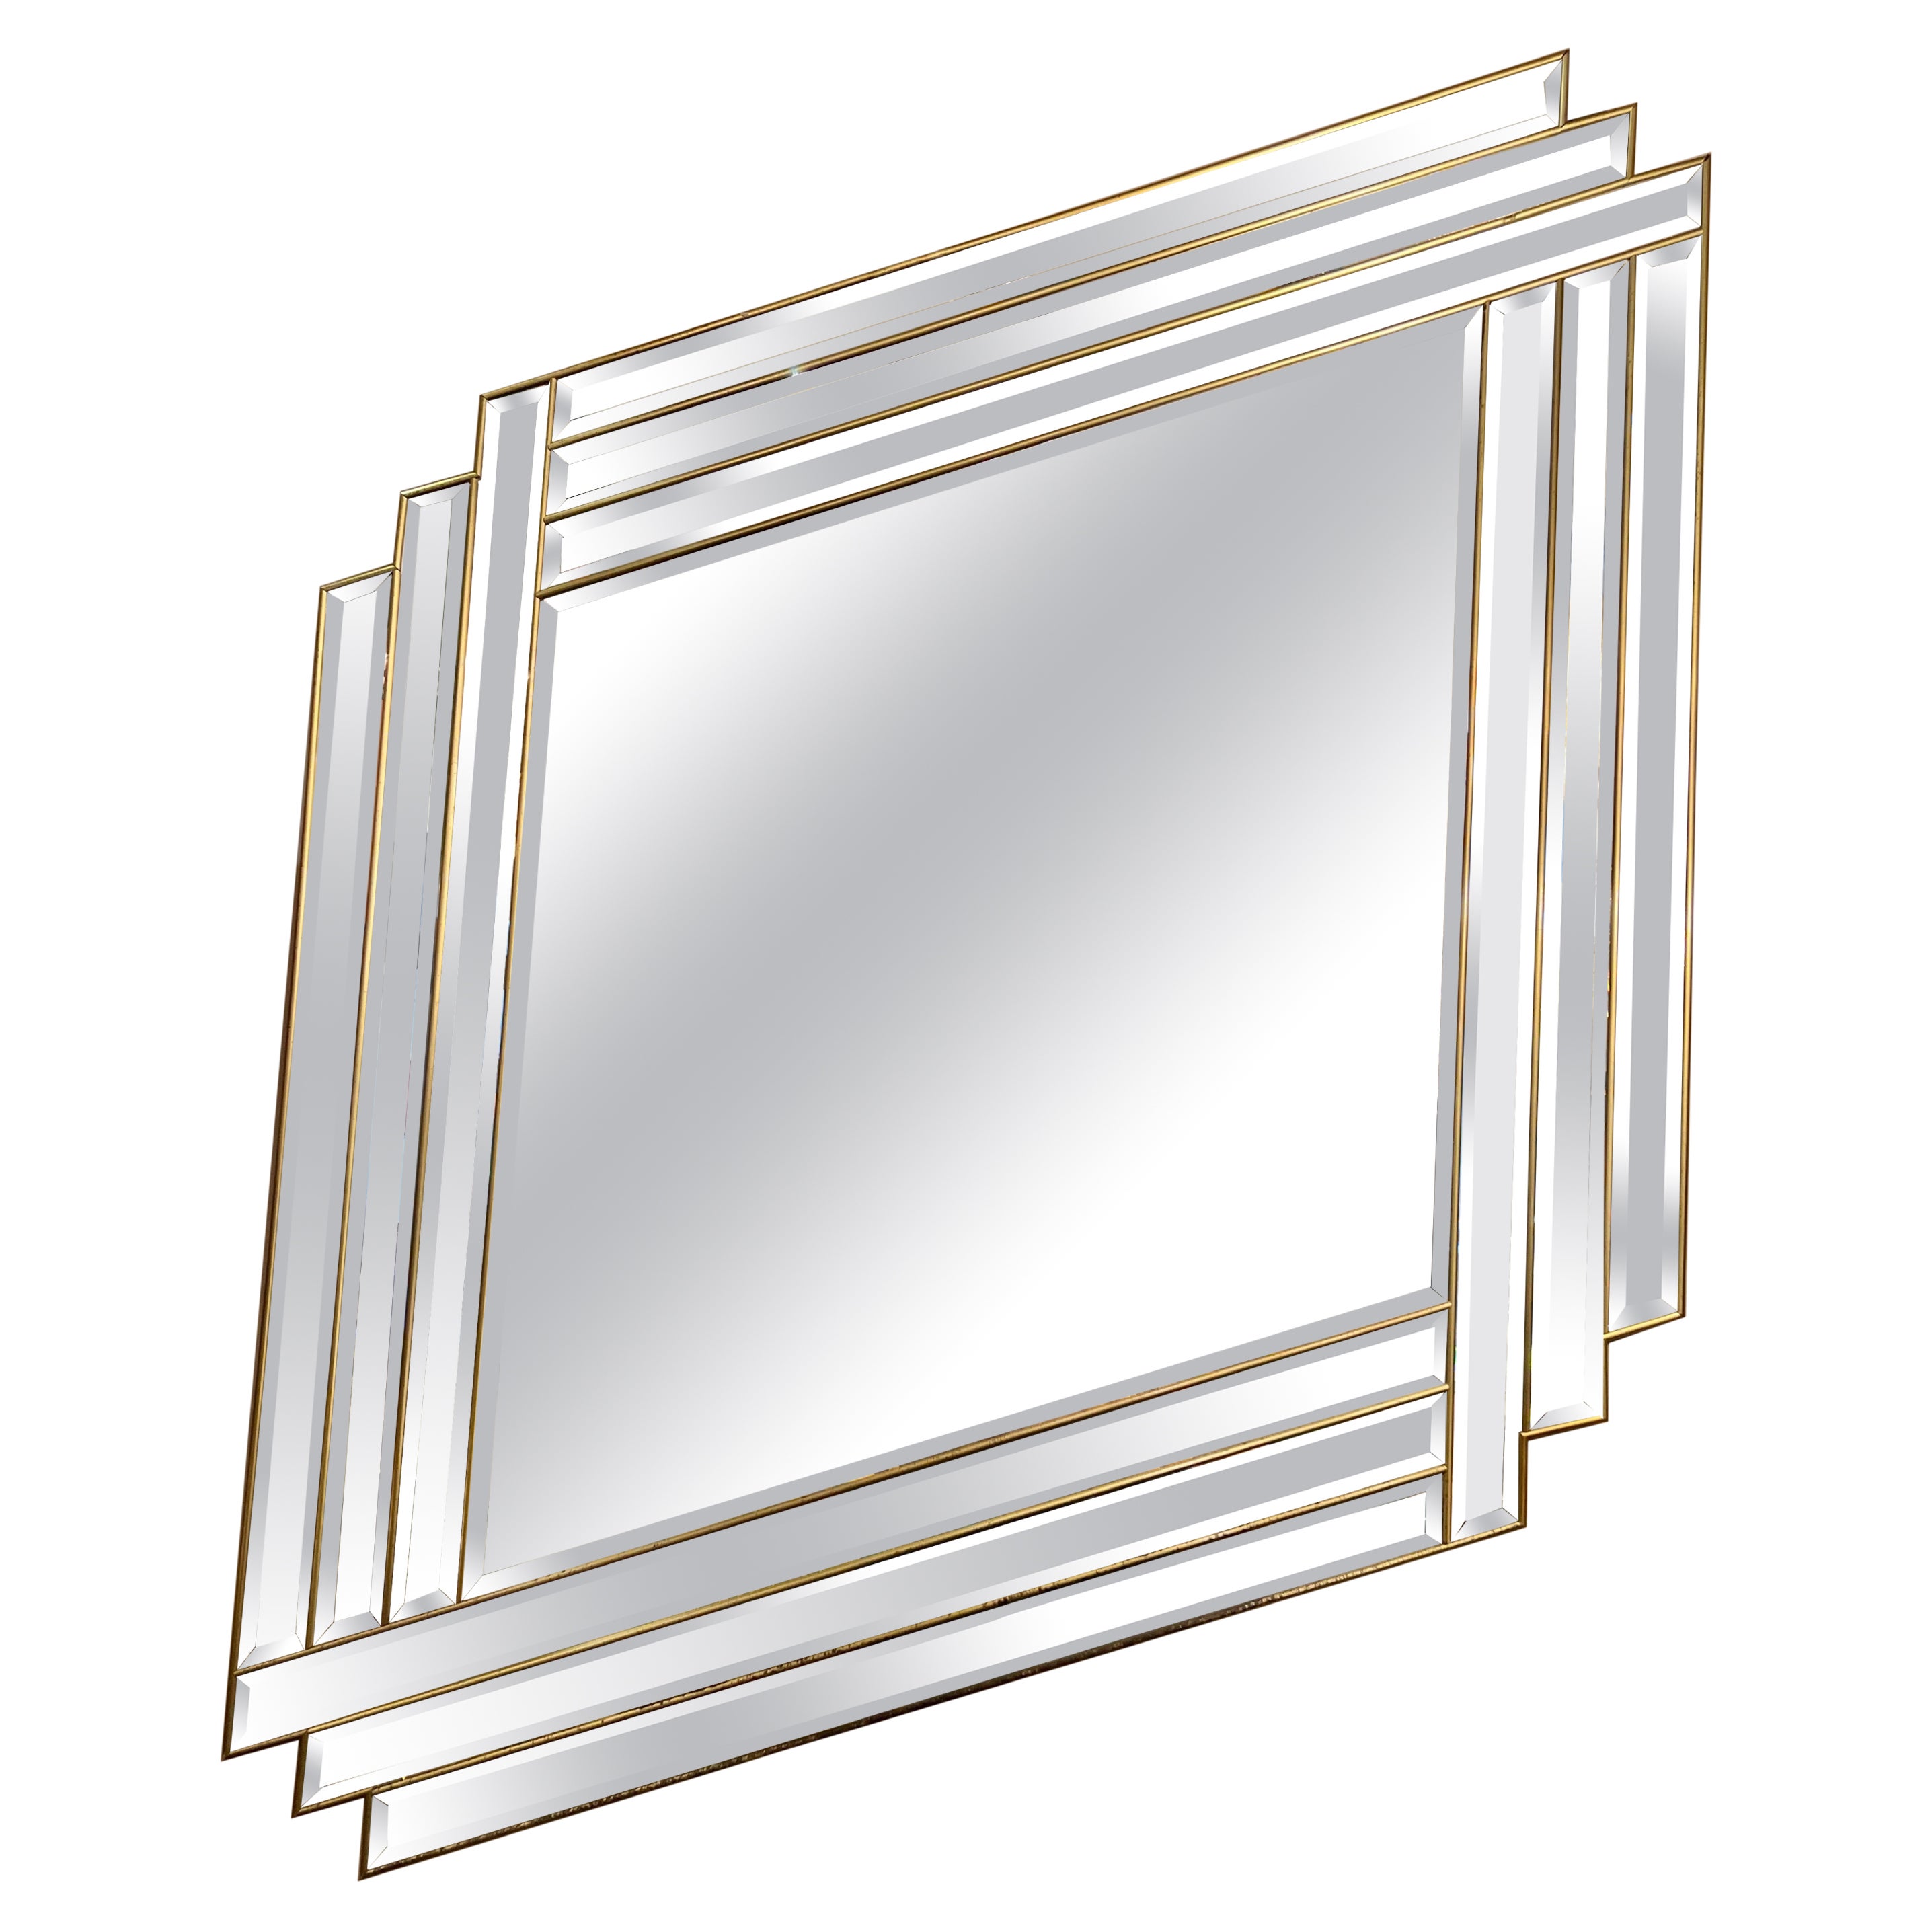 Art Deco Mirror in the Shape of a Rhombus with Brass Inlays, 1940s